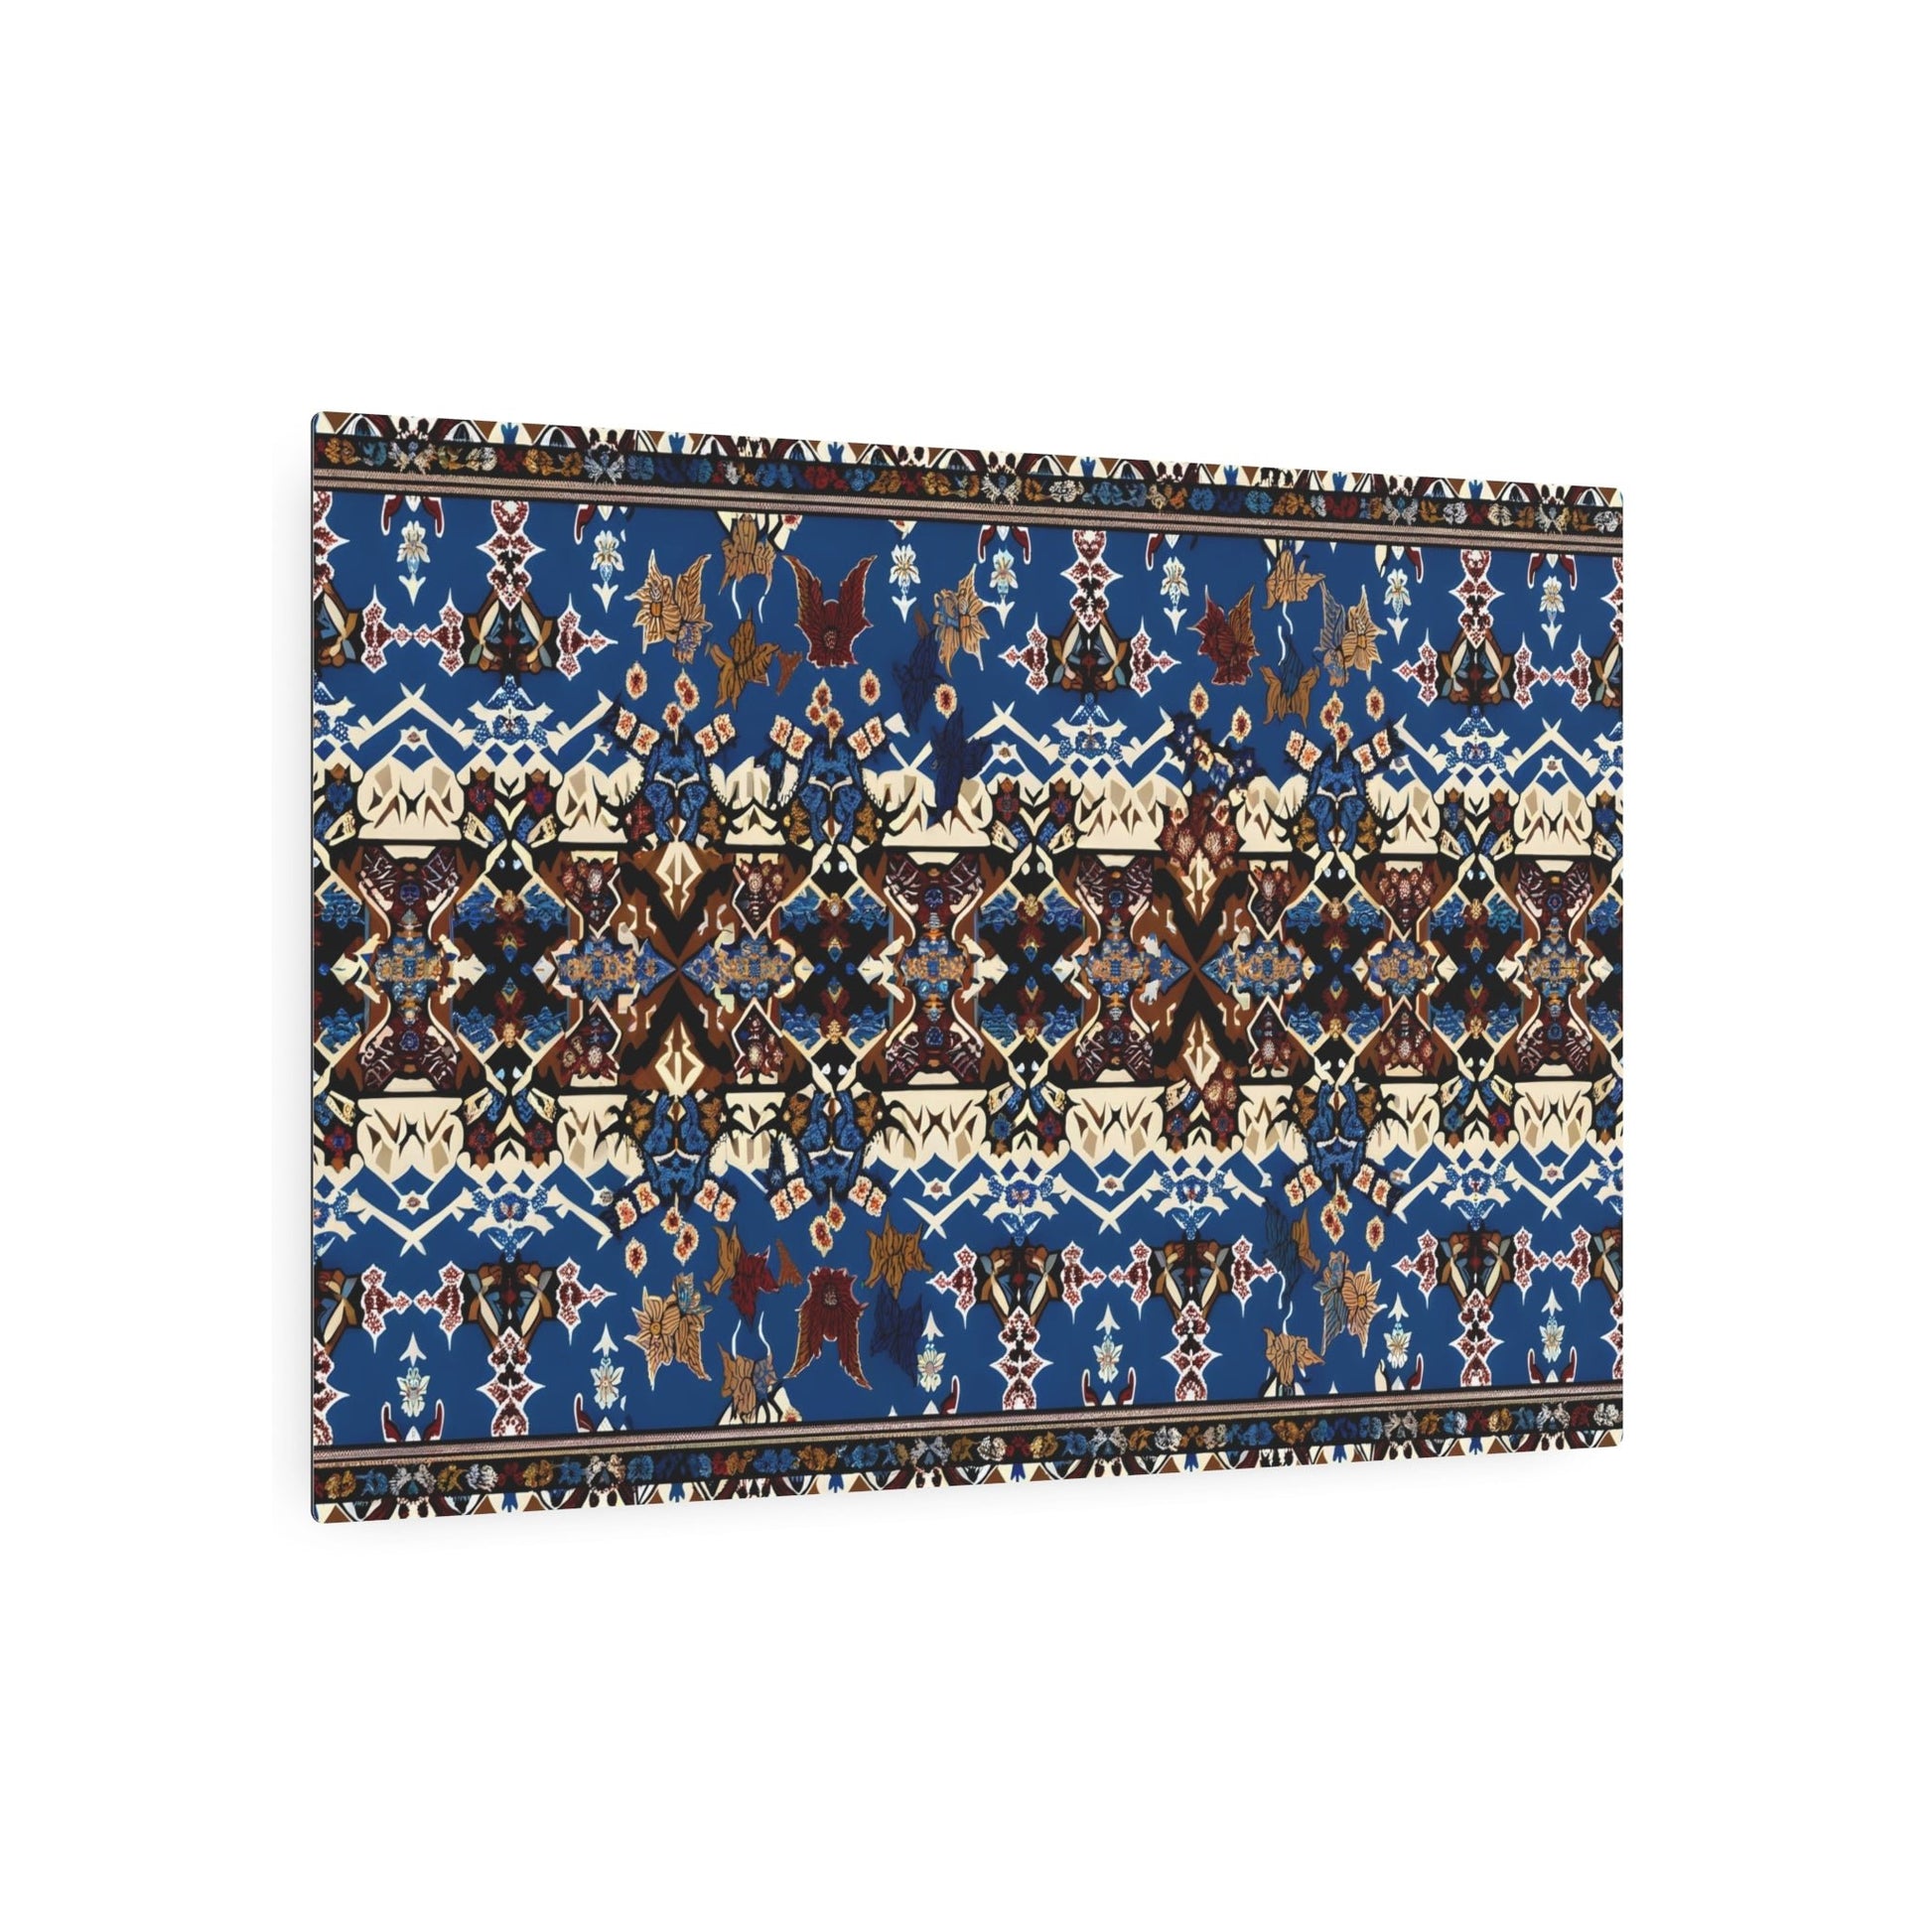 Metal Poster Art | "Traditional Indonesian Batik Art - Geometric & Floral Patterns in Deep Blue and Earthy Brown with Red & Yellow Accents - Non-Western Global - Metal Poster Art 36″ x 24″ (Horizontal) 0.12''